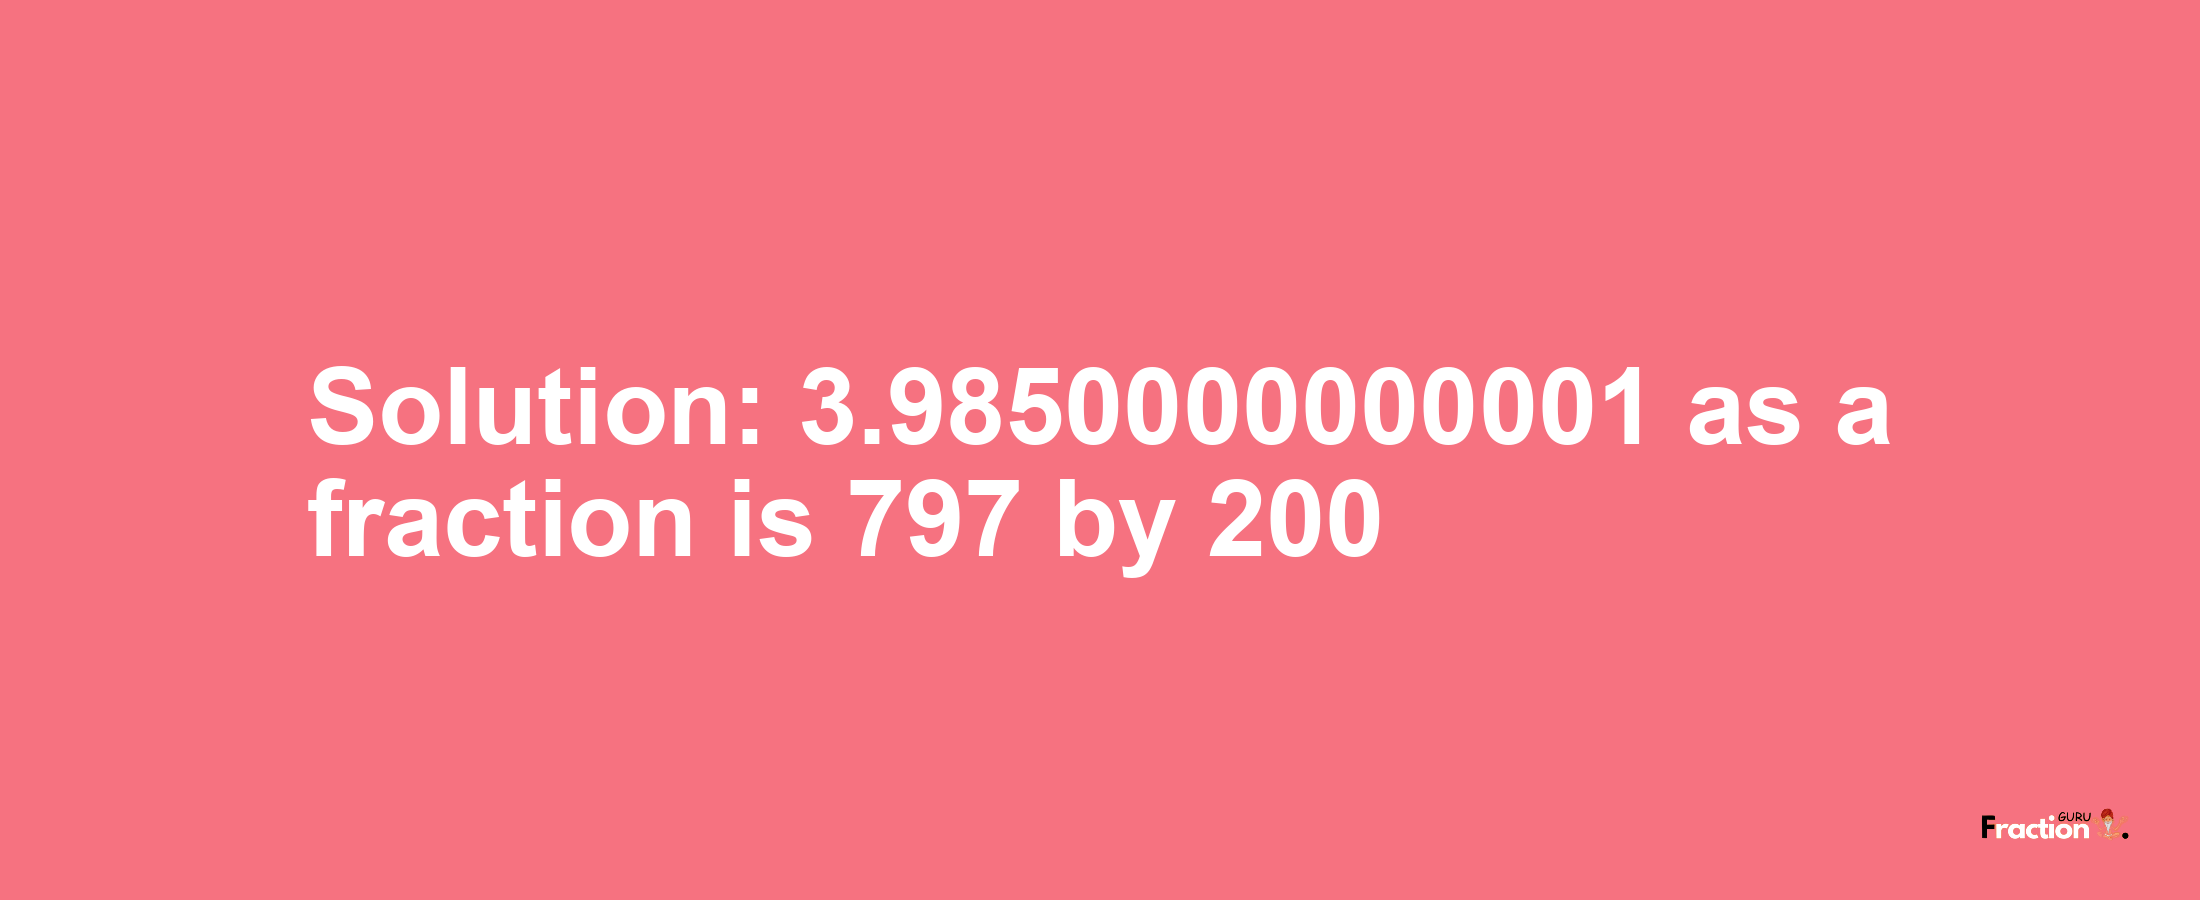 Solution:3.9850000000001 as a fraction is 797/200